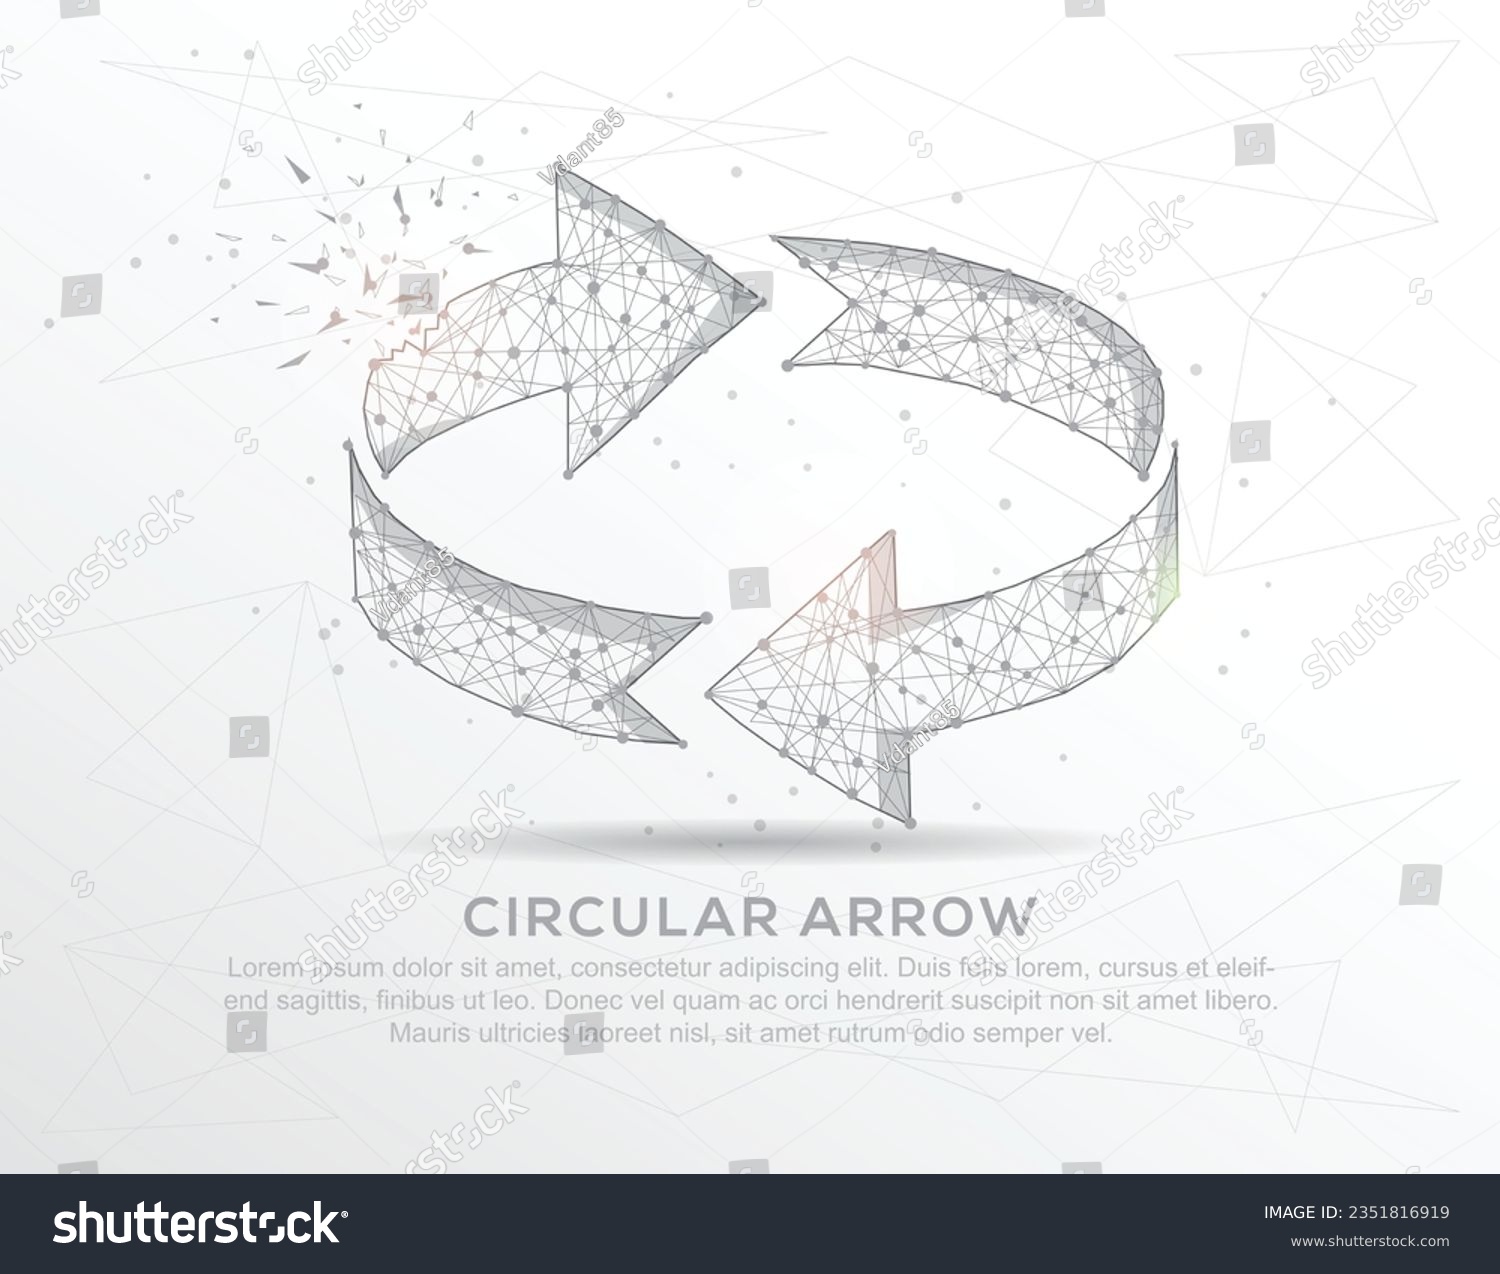 SVG of Circular arrow abstract mash line and composition digitally drawn in the form of broken a part triangle shape and scattered dots low poly wire frame. svg